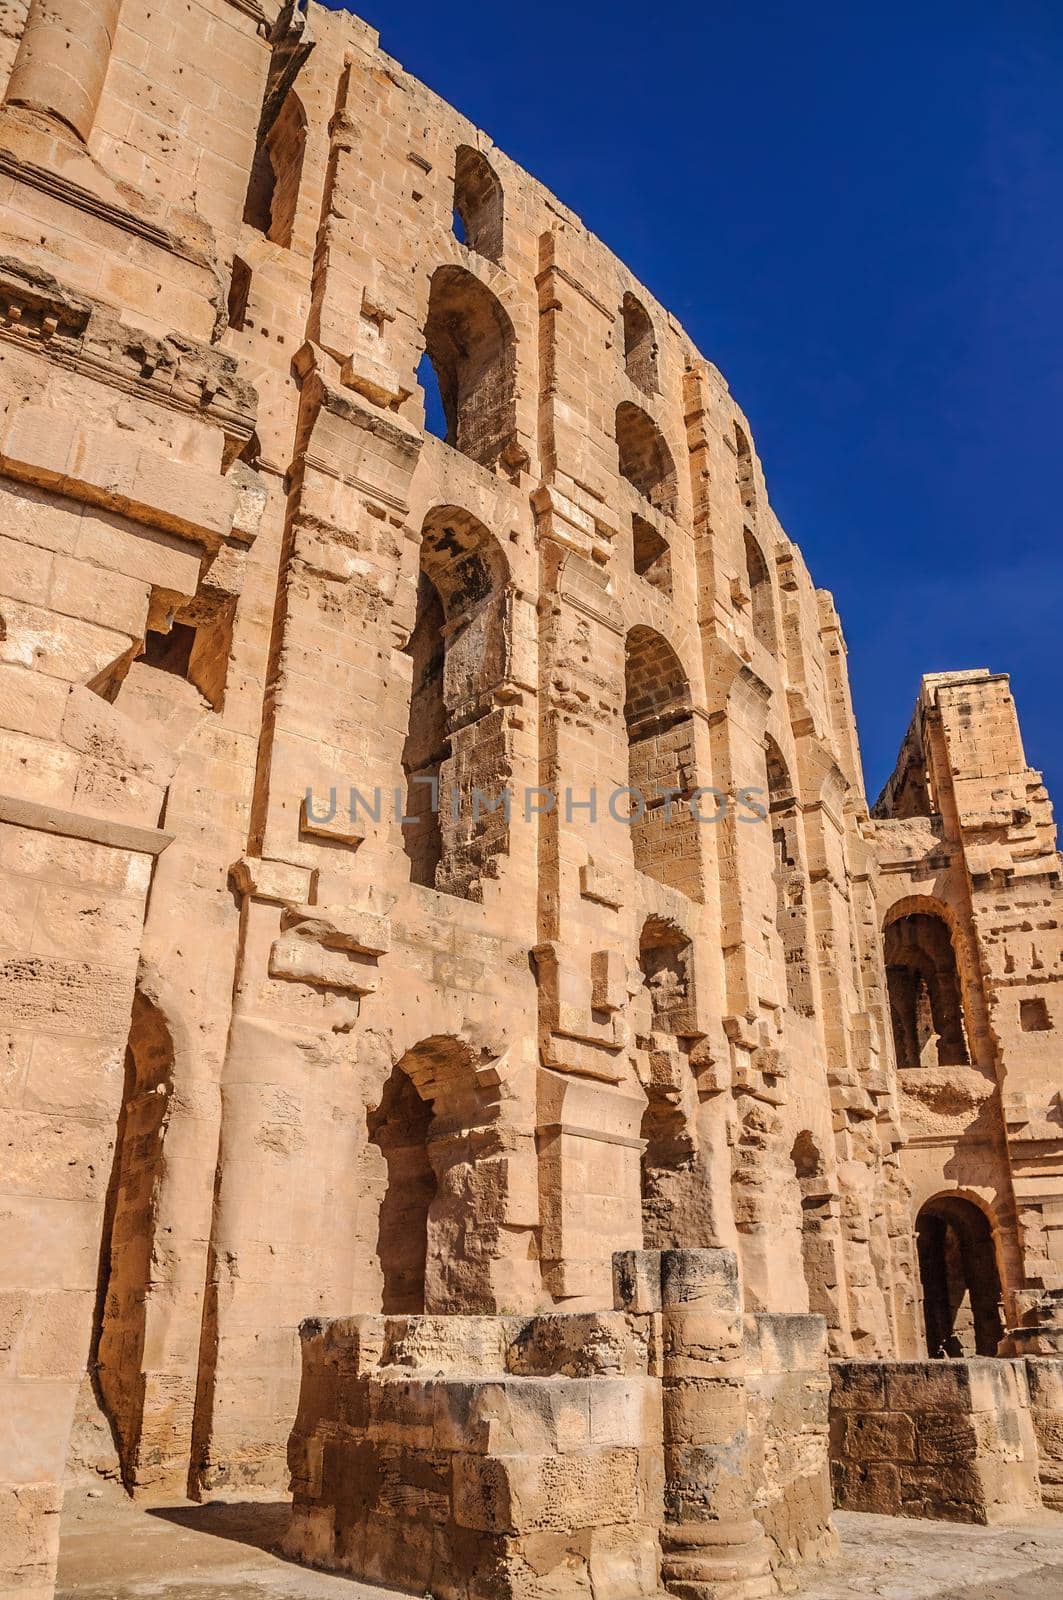 Ruins of the largest coliseum in North Africa. El Jem,Tunisia, UNESCO by Eagle2308